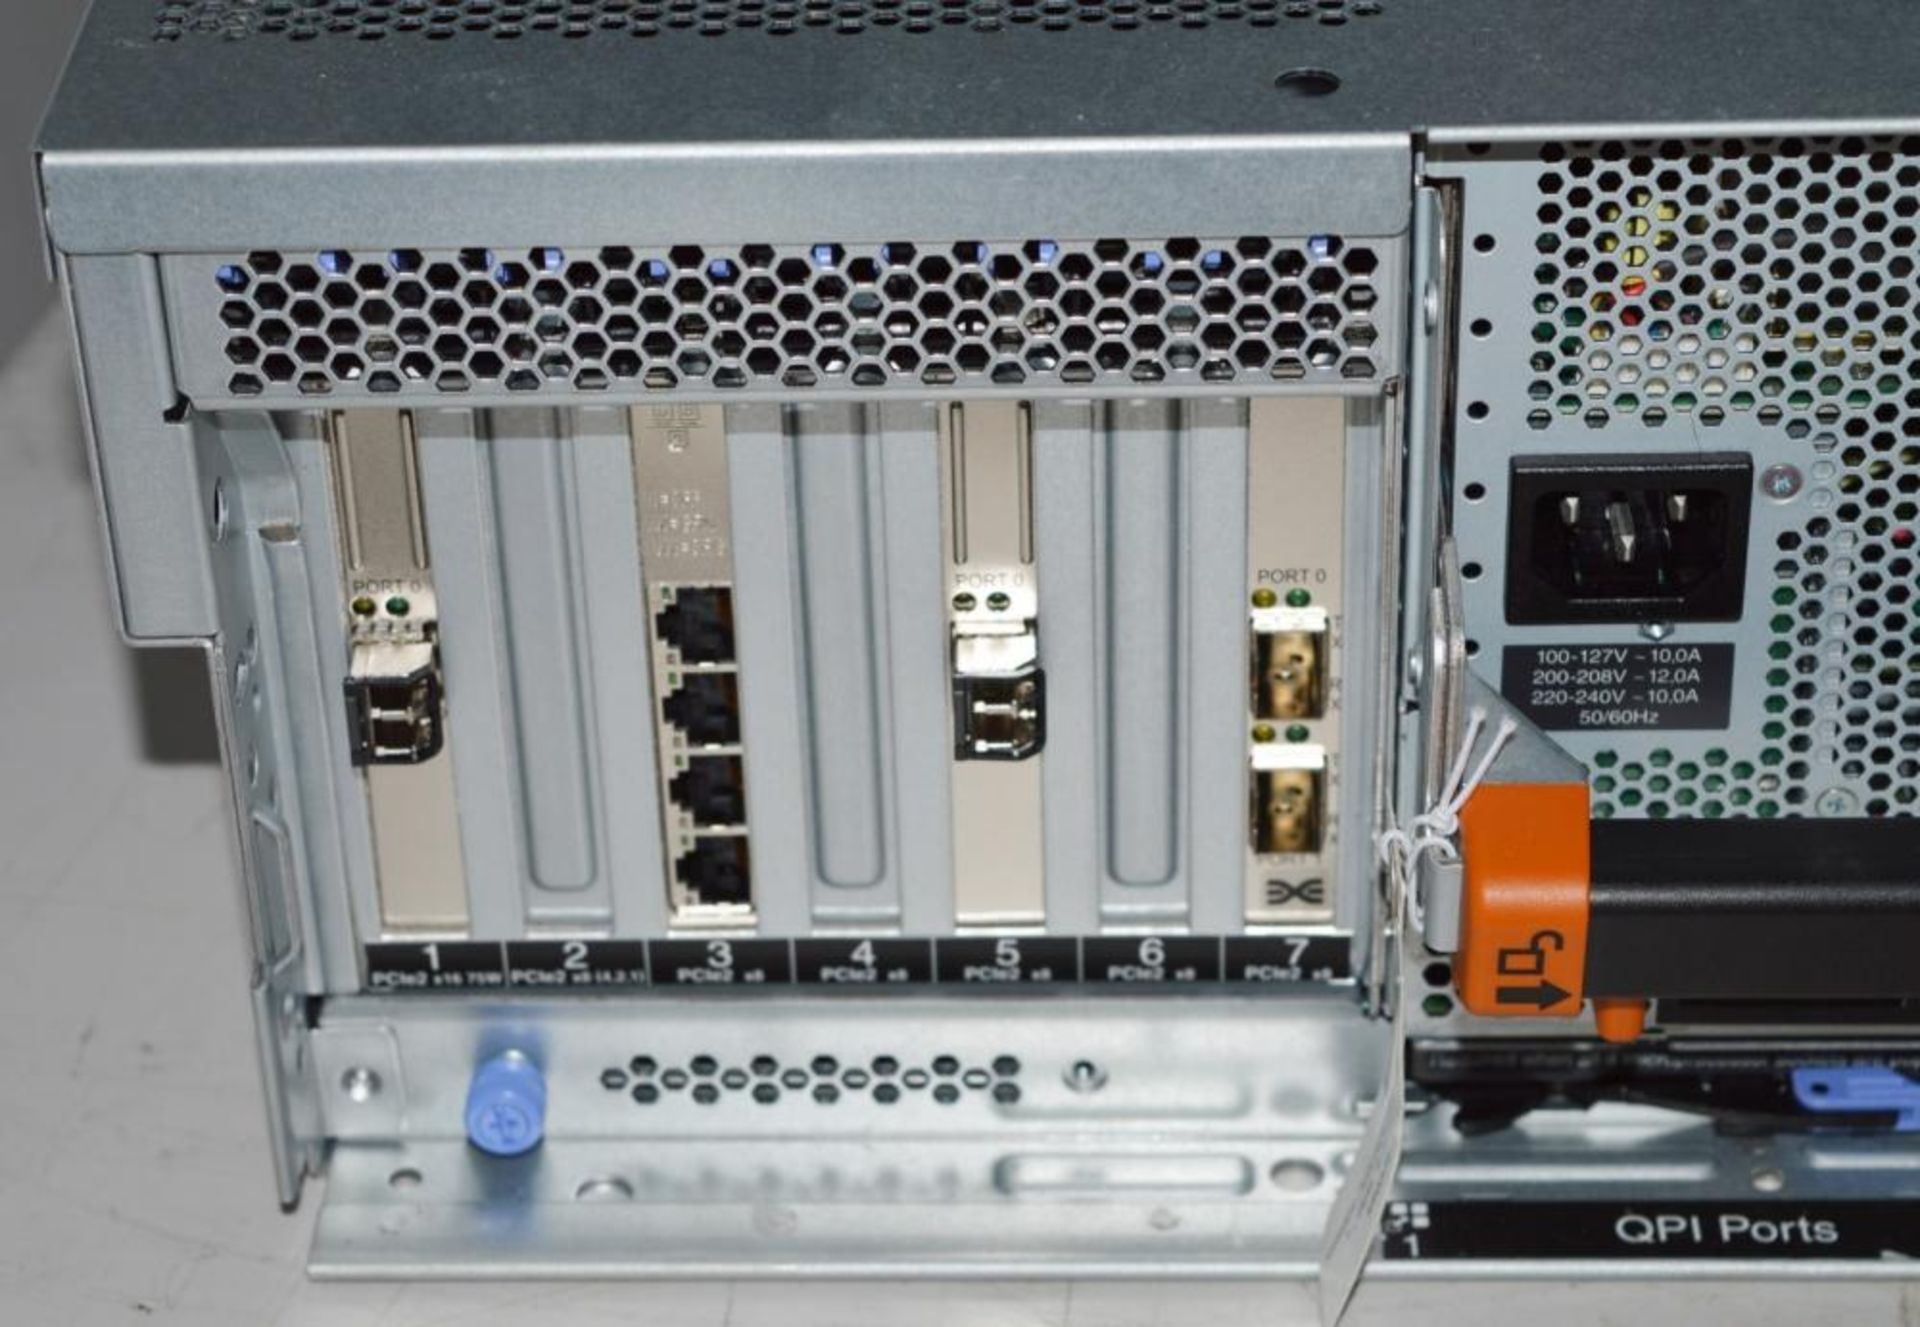 1 x IBM System X3850 X5 Rack Mount Server - Features 4 x Intel 10 Core E7-8850 2ghz Processors, - Image 9 of 9